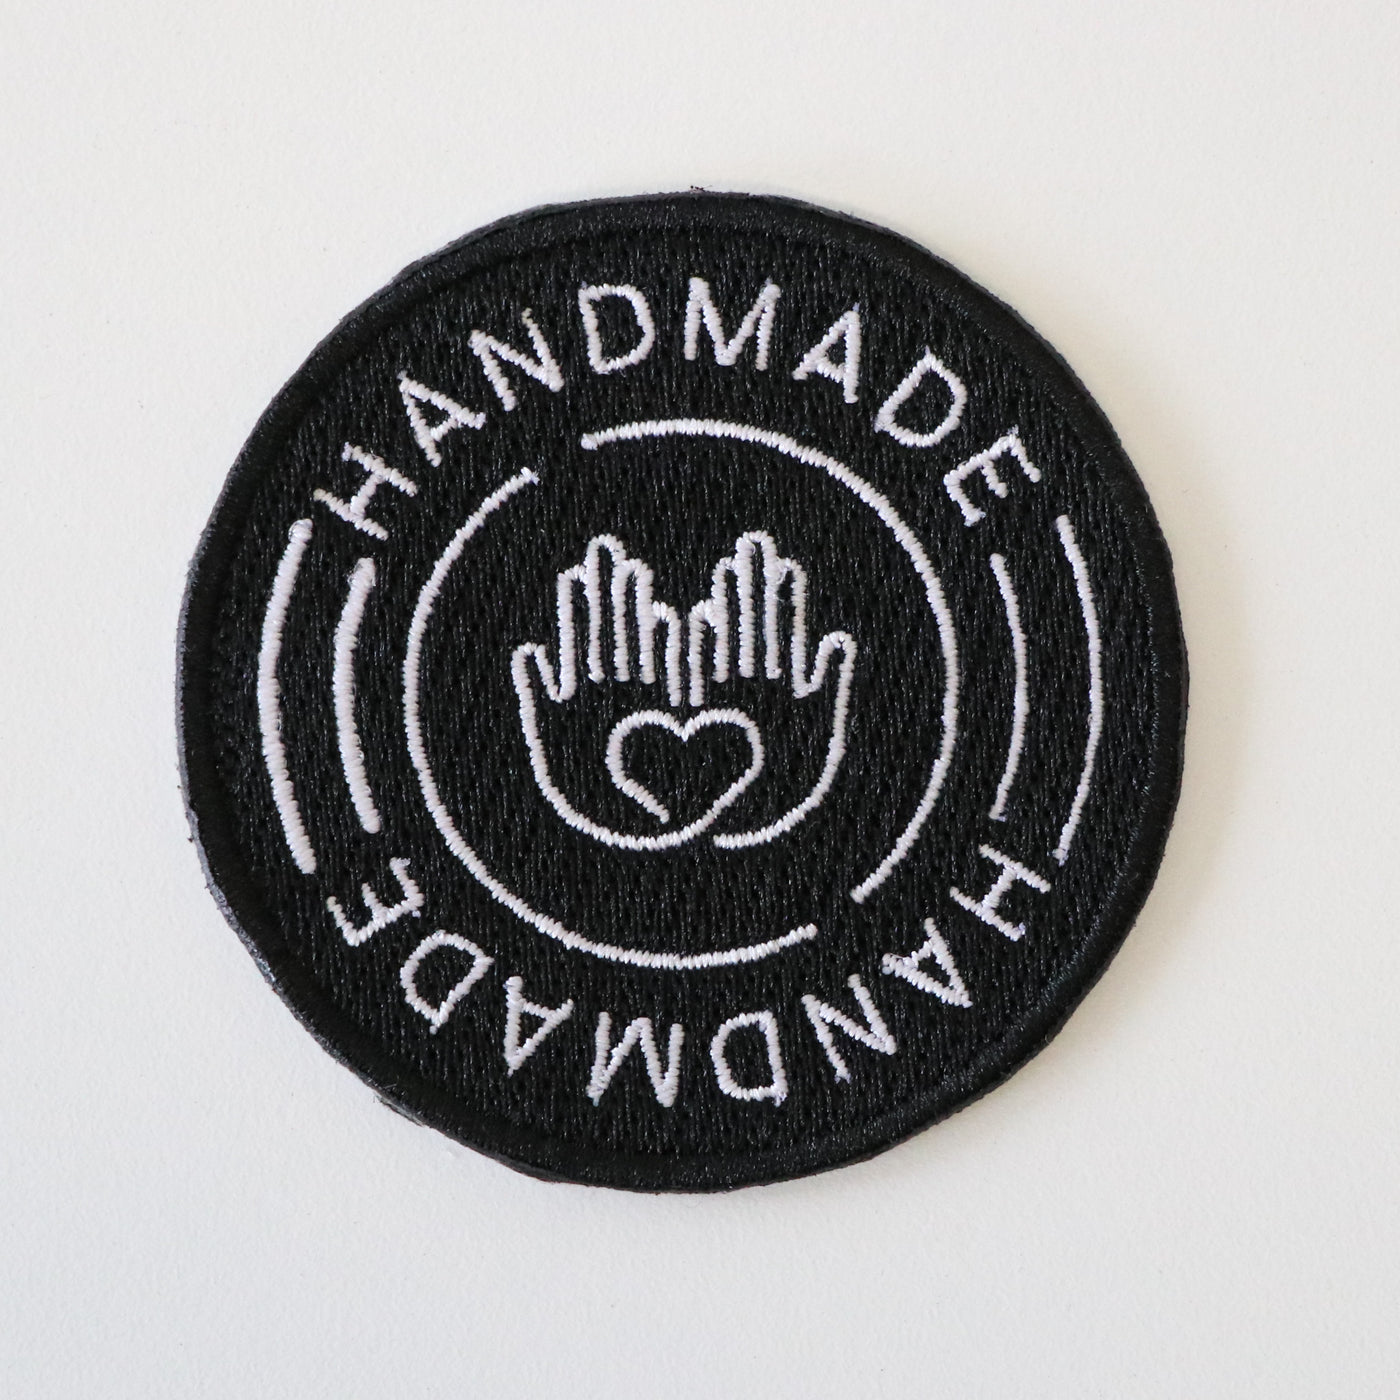 Embroidered Patch - "Handmade"